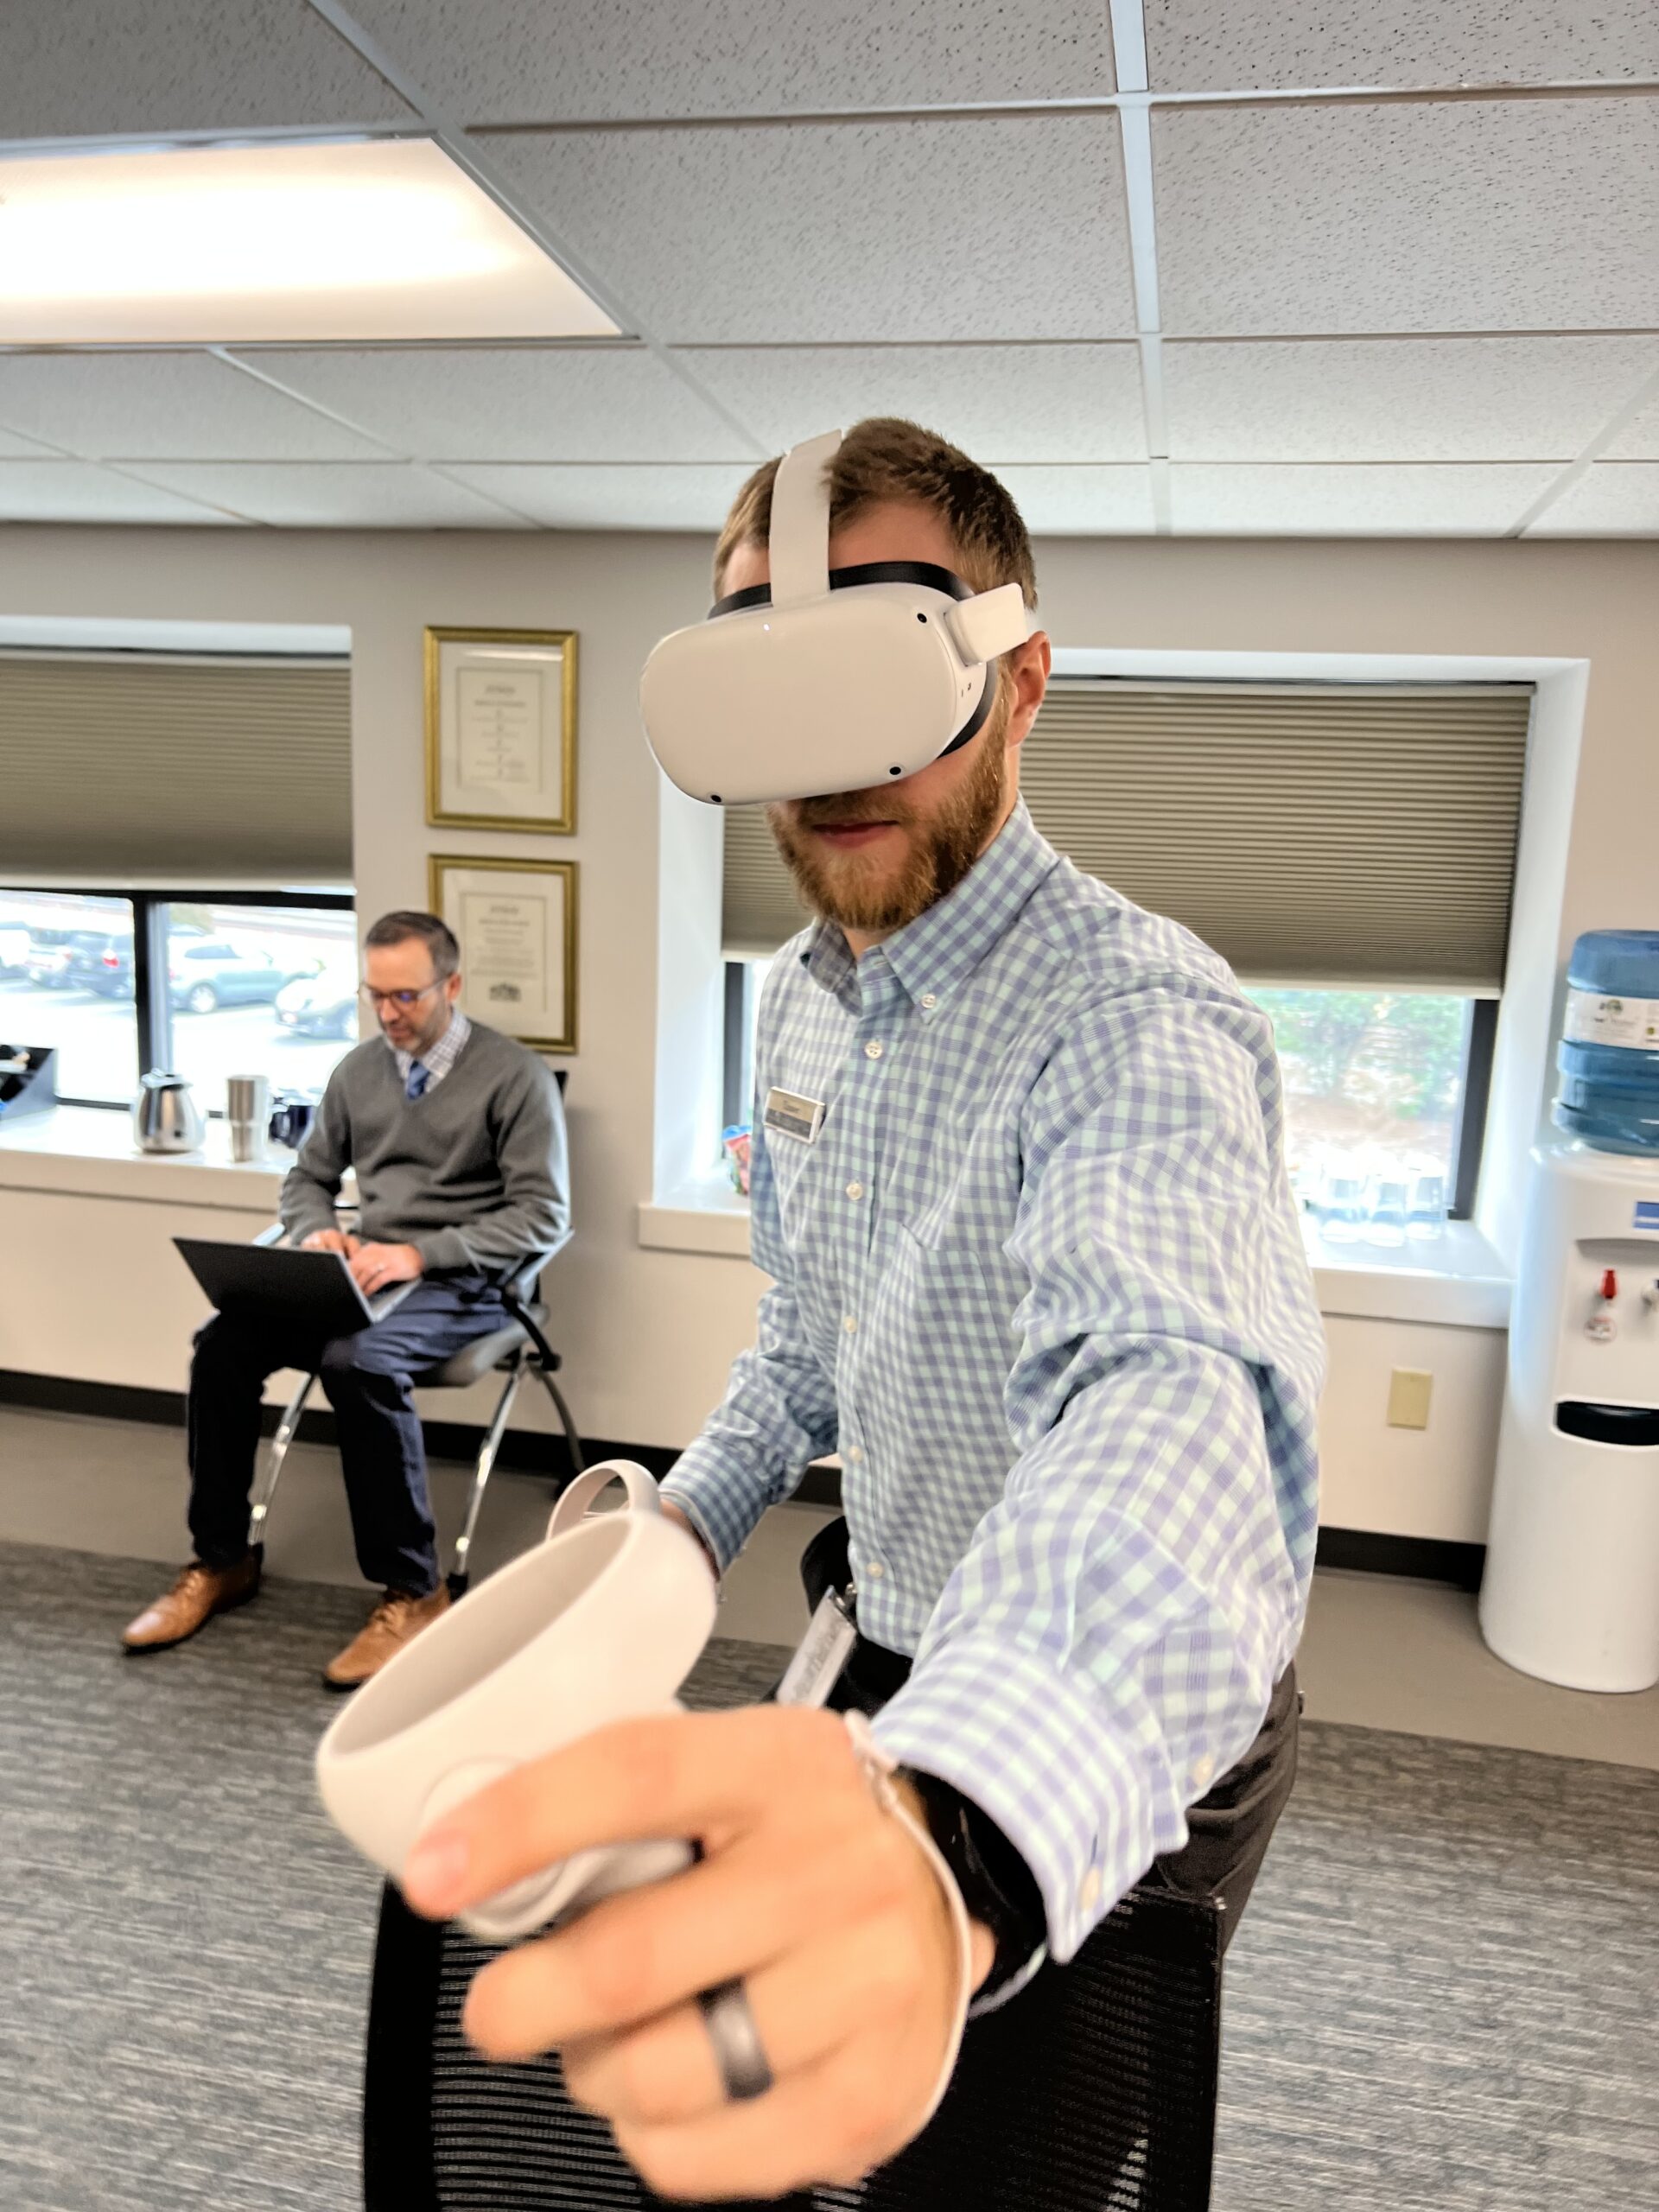 Bring VR Training to Your Organization